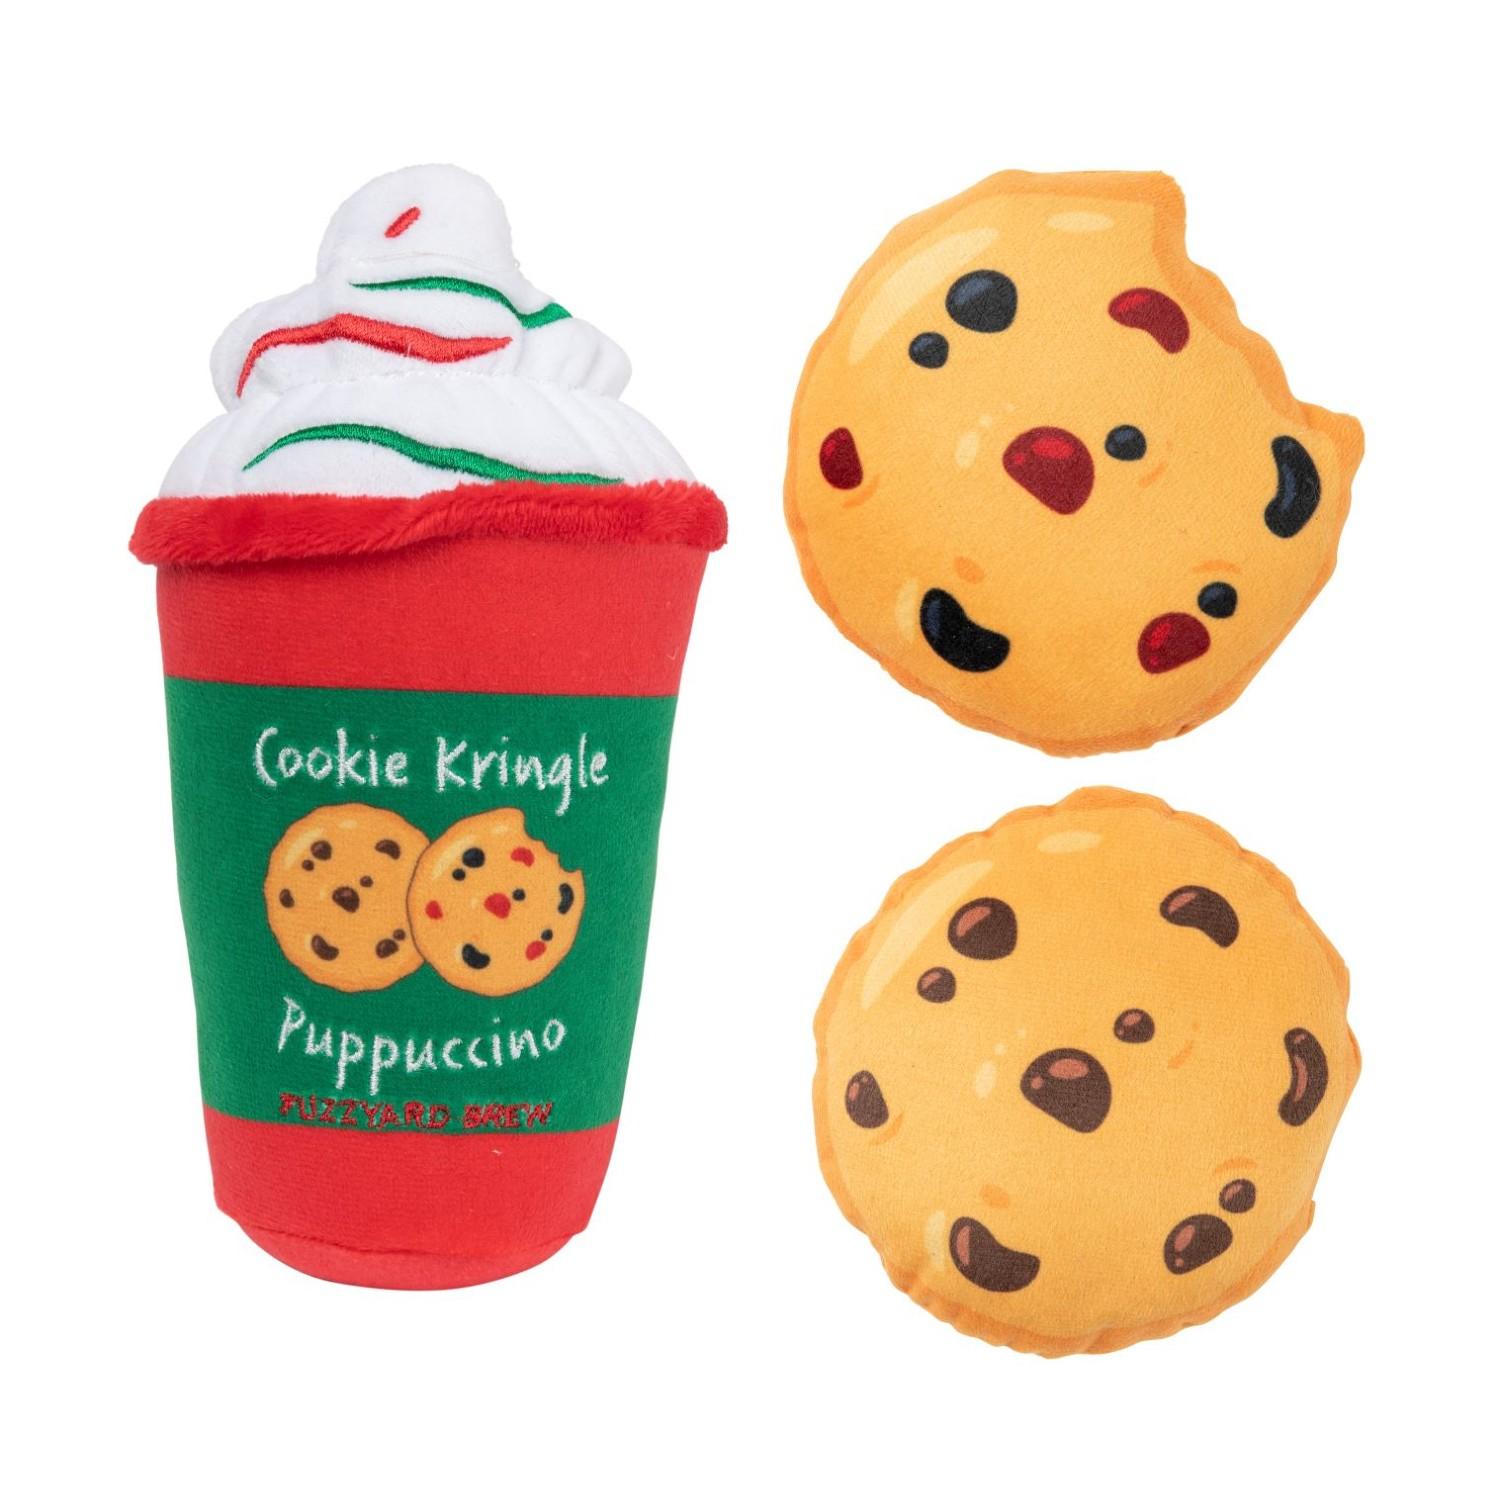 FuzzYard Holiday Dog Toy Set - Cookie Kringle Puppuccino & Cookies